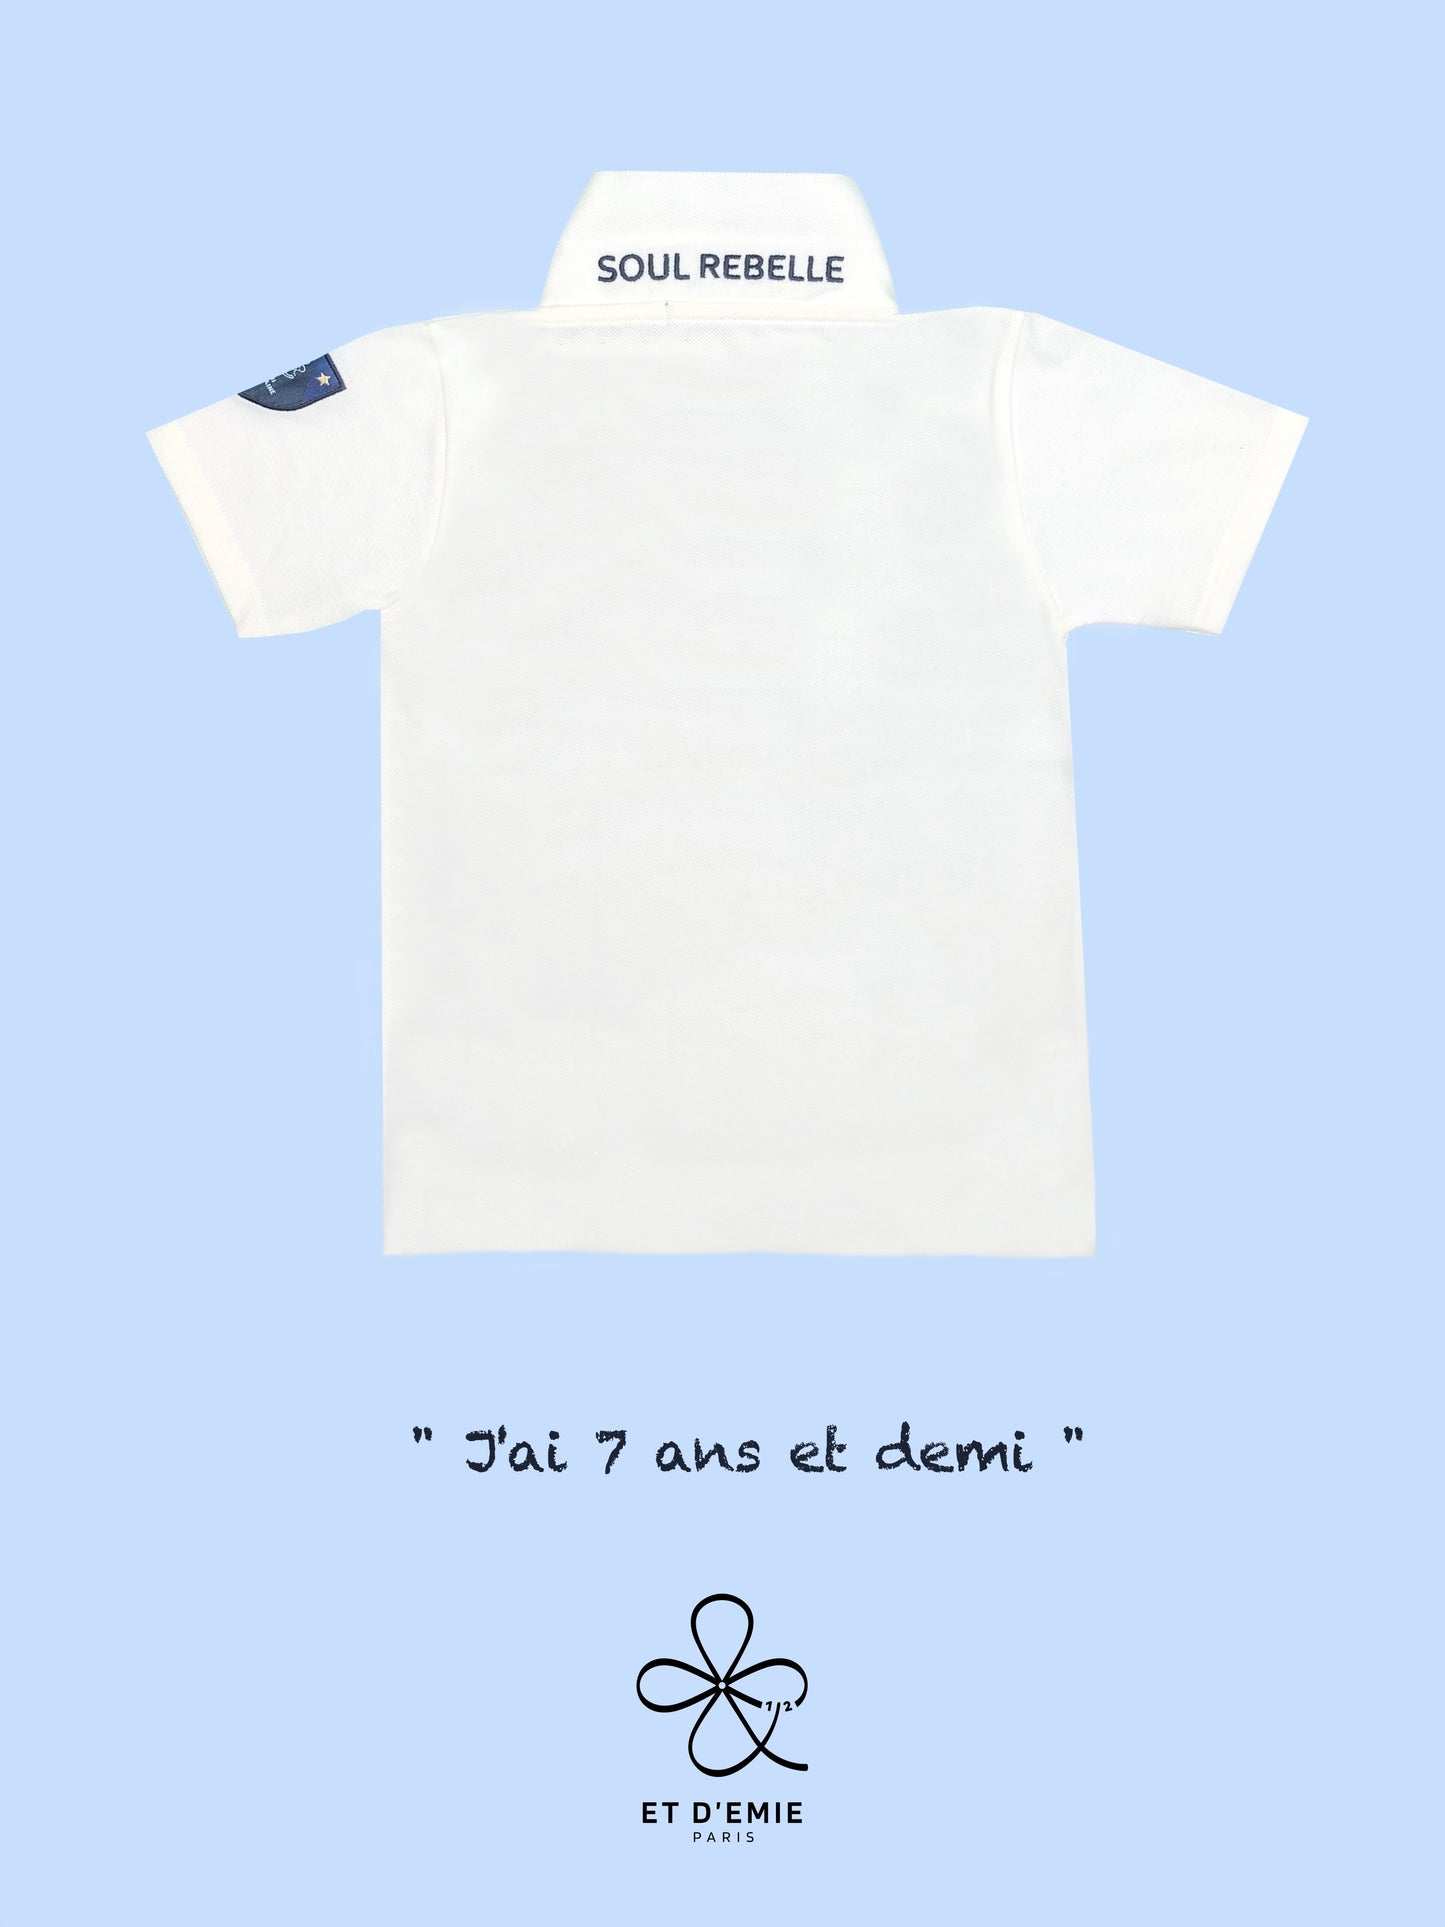 MINI CAPTAIN - SOUL REBELLE polo shirt "I'm 7 and a half years old" embroidered in ivory organic pique cotton🇫🇷